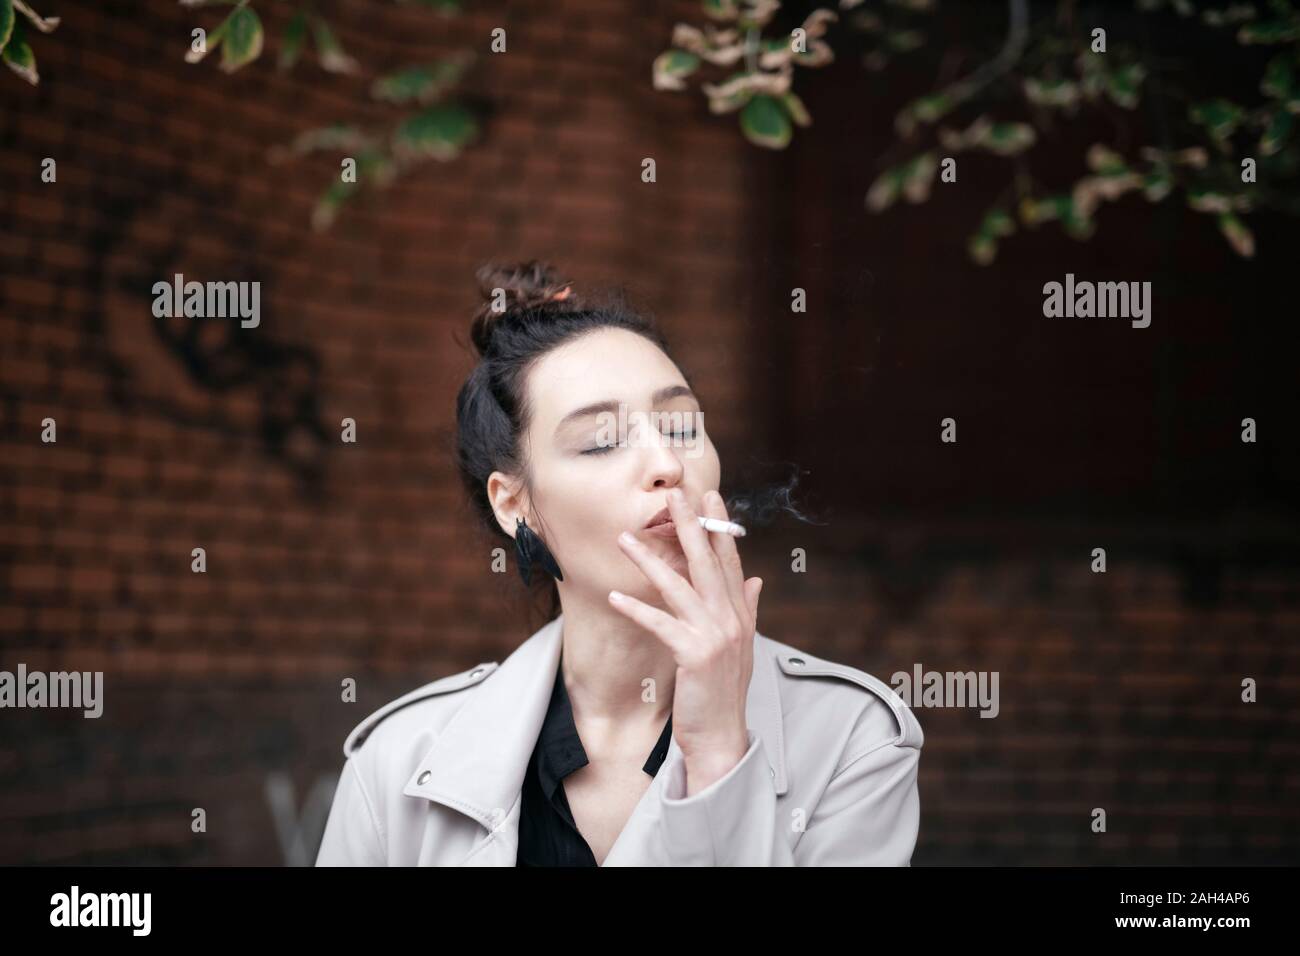 Portrait of woman smoking with eyes closed Stock Photo